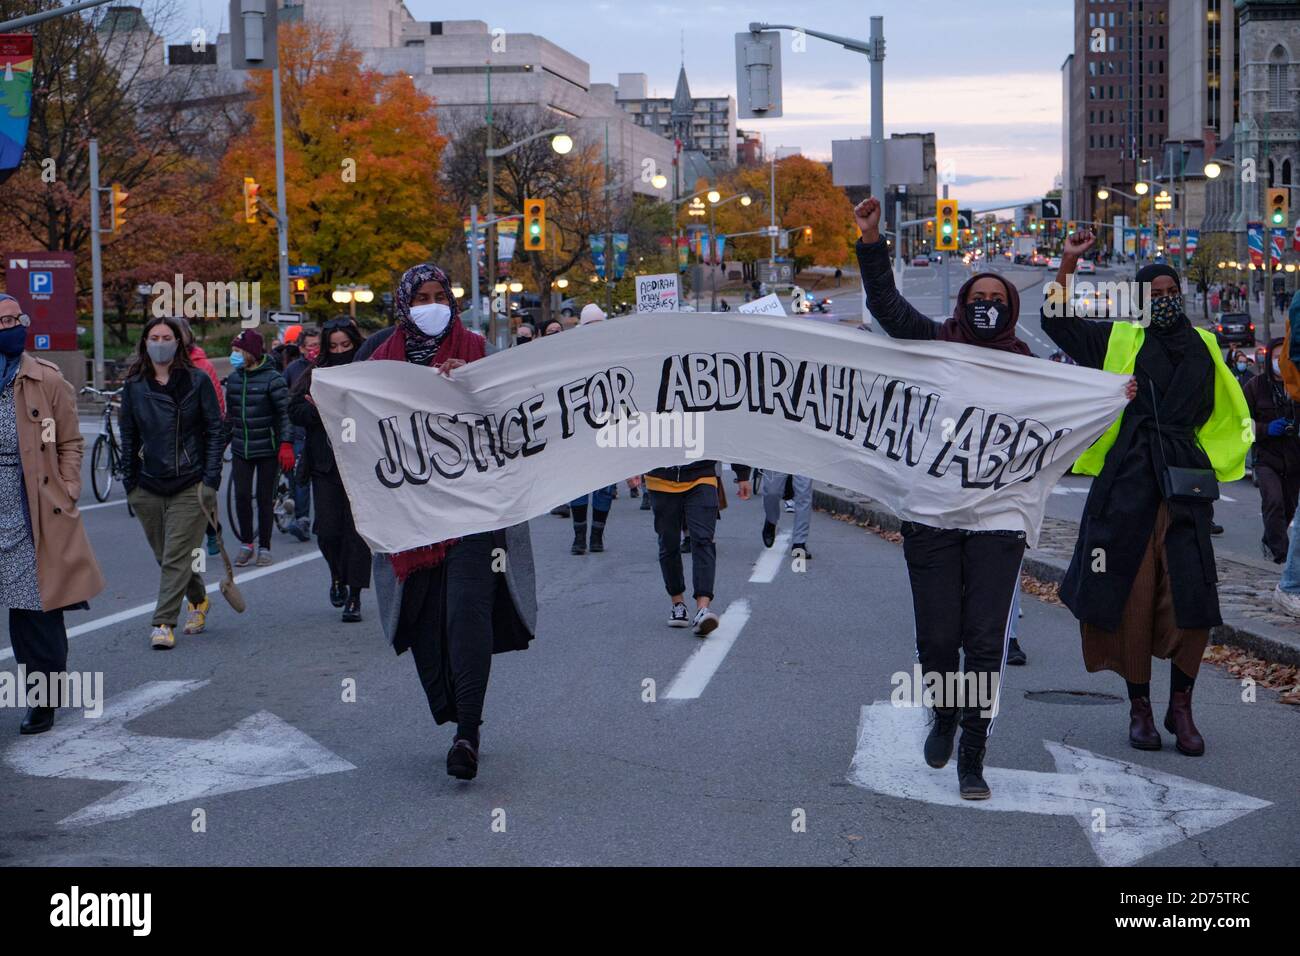 Ottawa, Canada. October 20th, 2020. About 500 people took to the street demanding justice for Abdirahman Abdi, who was killed during his arrest in 2016. Earlier today, the court found the arresting officer Ottawa police Const. Daniel Montsion not guilty on all charges related to the death. This is another case in the ongoing community battle between the police and black members of the community. Abdi had come to Canada from Somalia in 2009 and at the time of his death was 37. Credit: meanderingemu/Alamy Live News Stock Photo